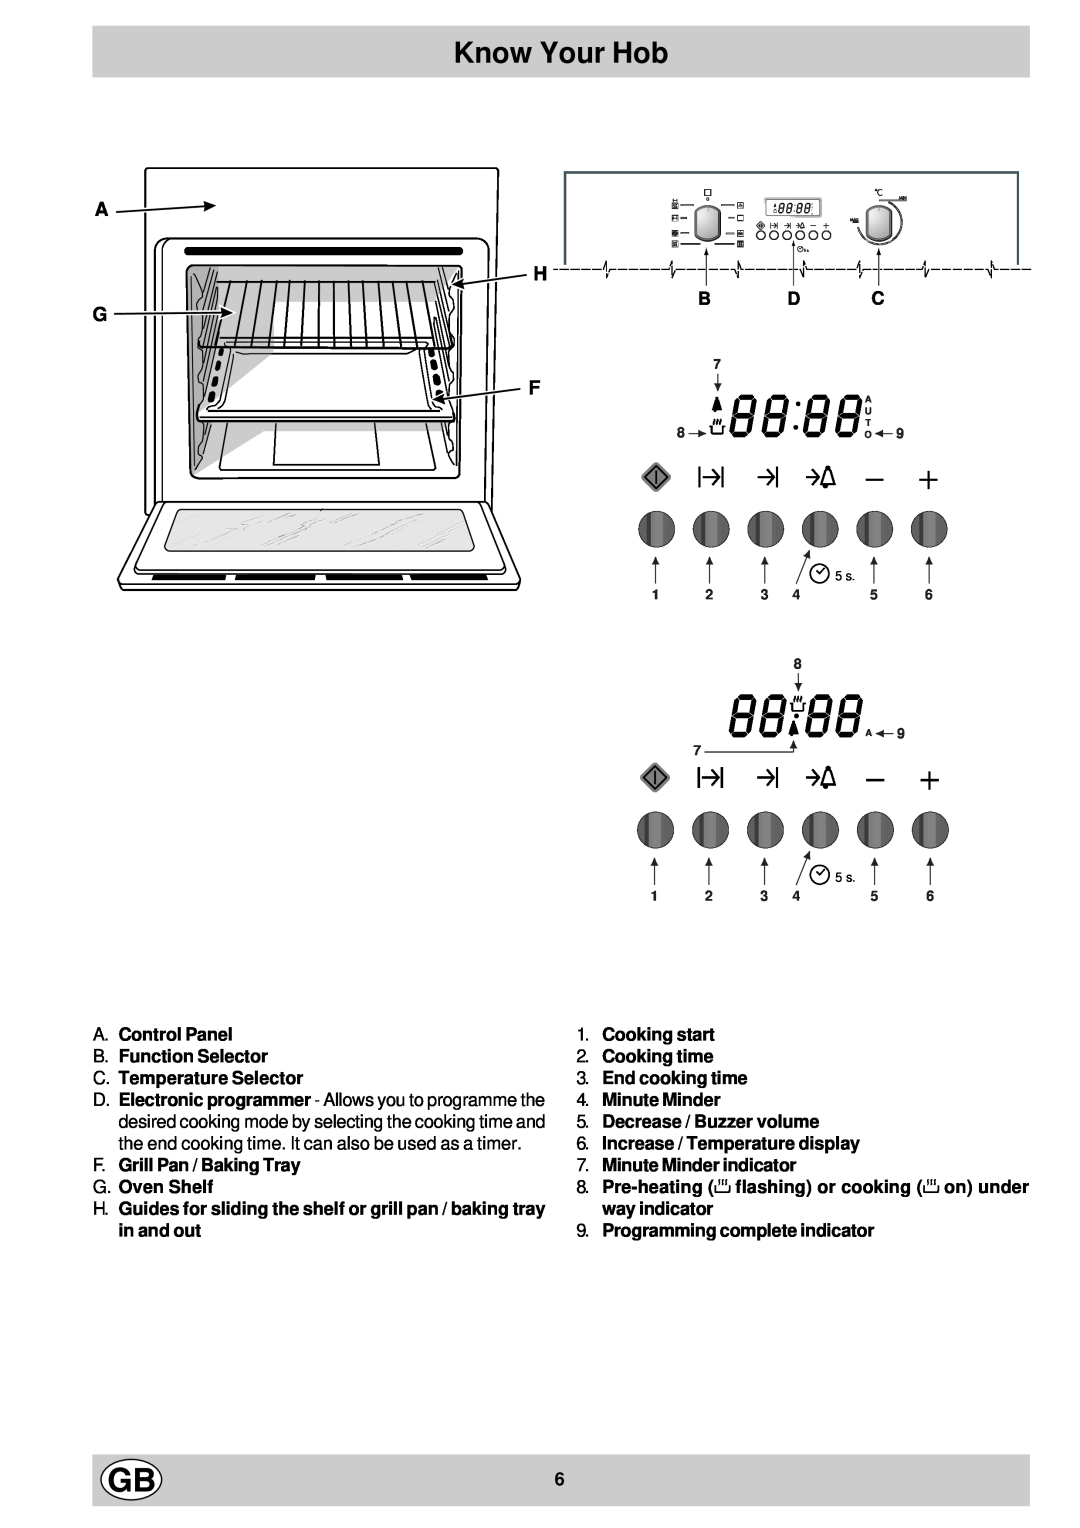 Hotpoint SD97 manual Know Your Hob, A H G F 